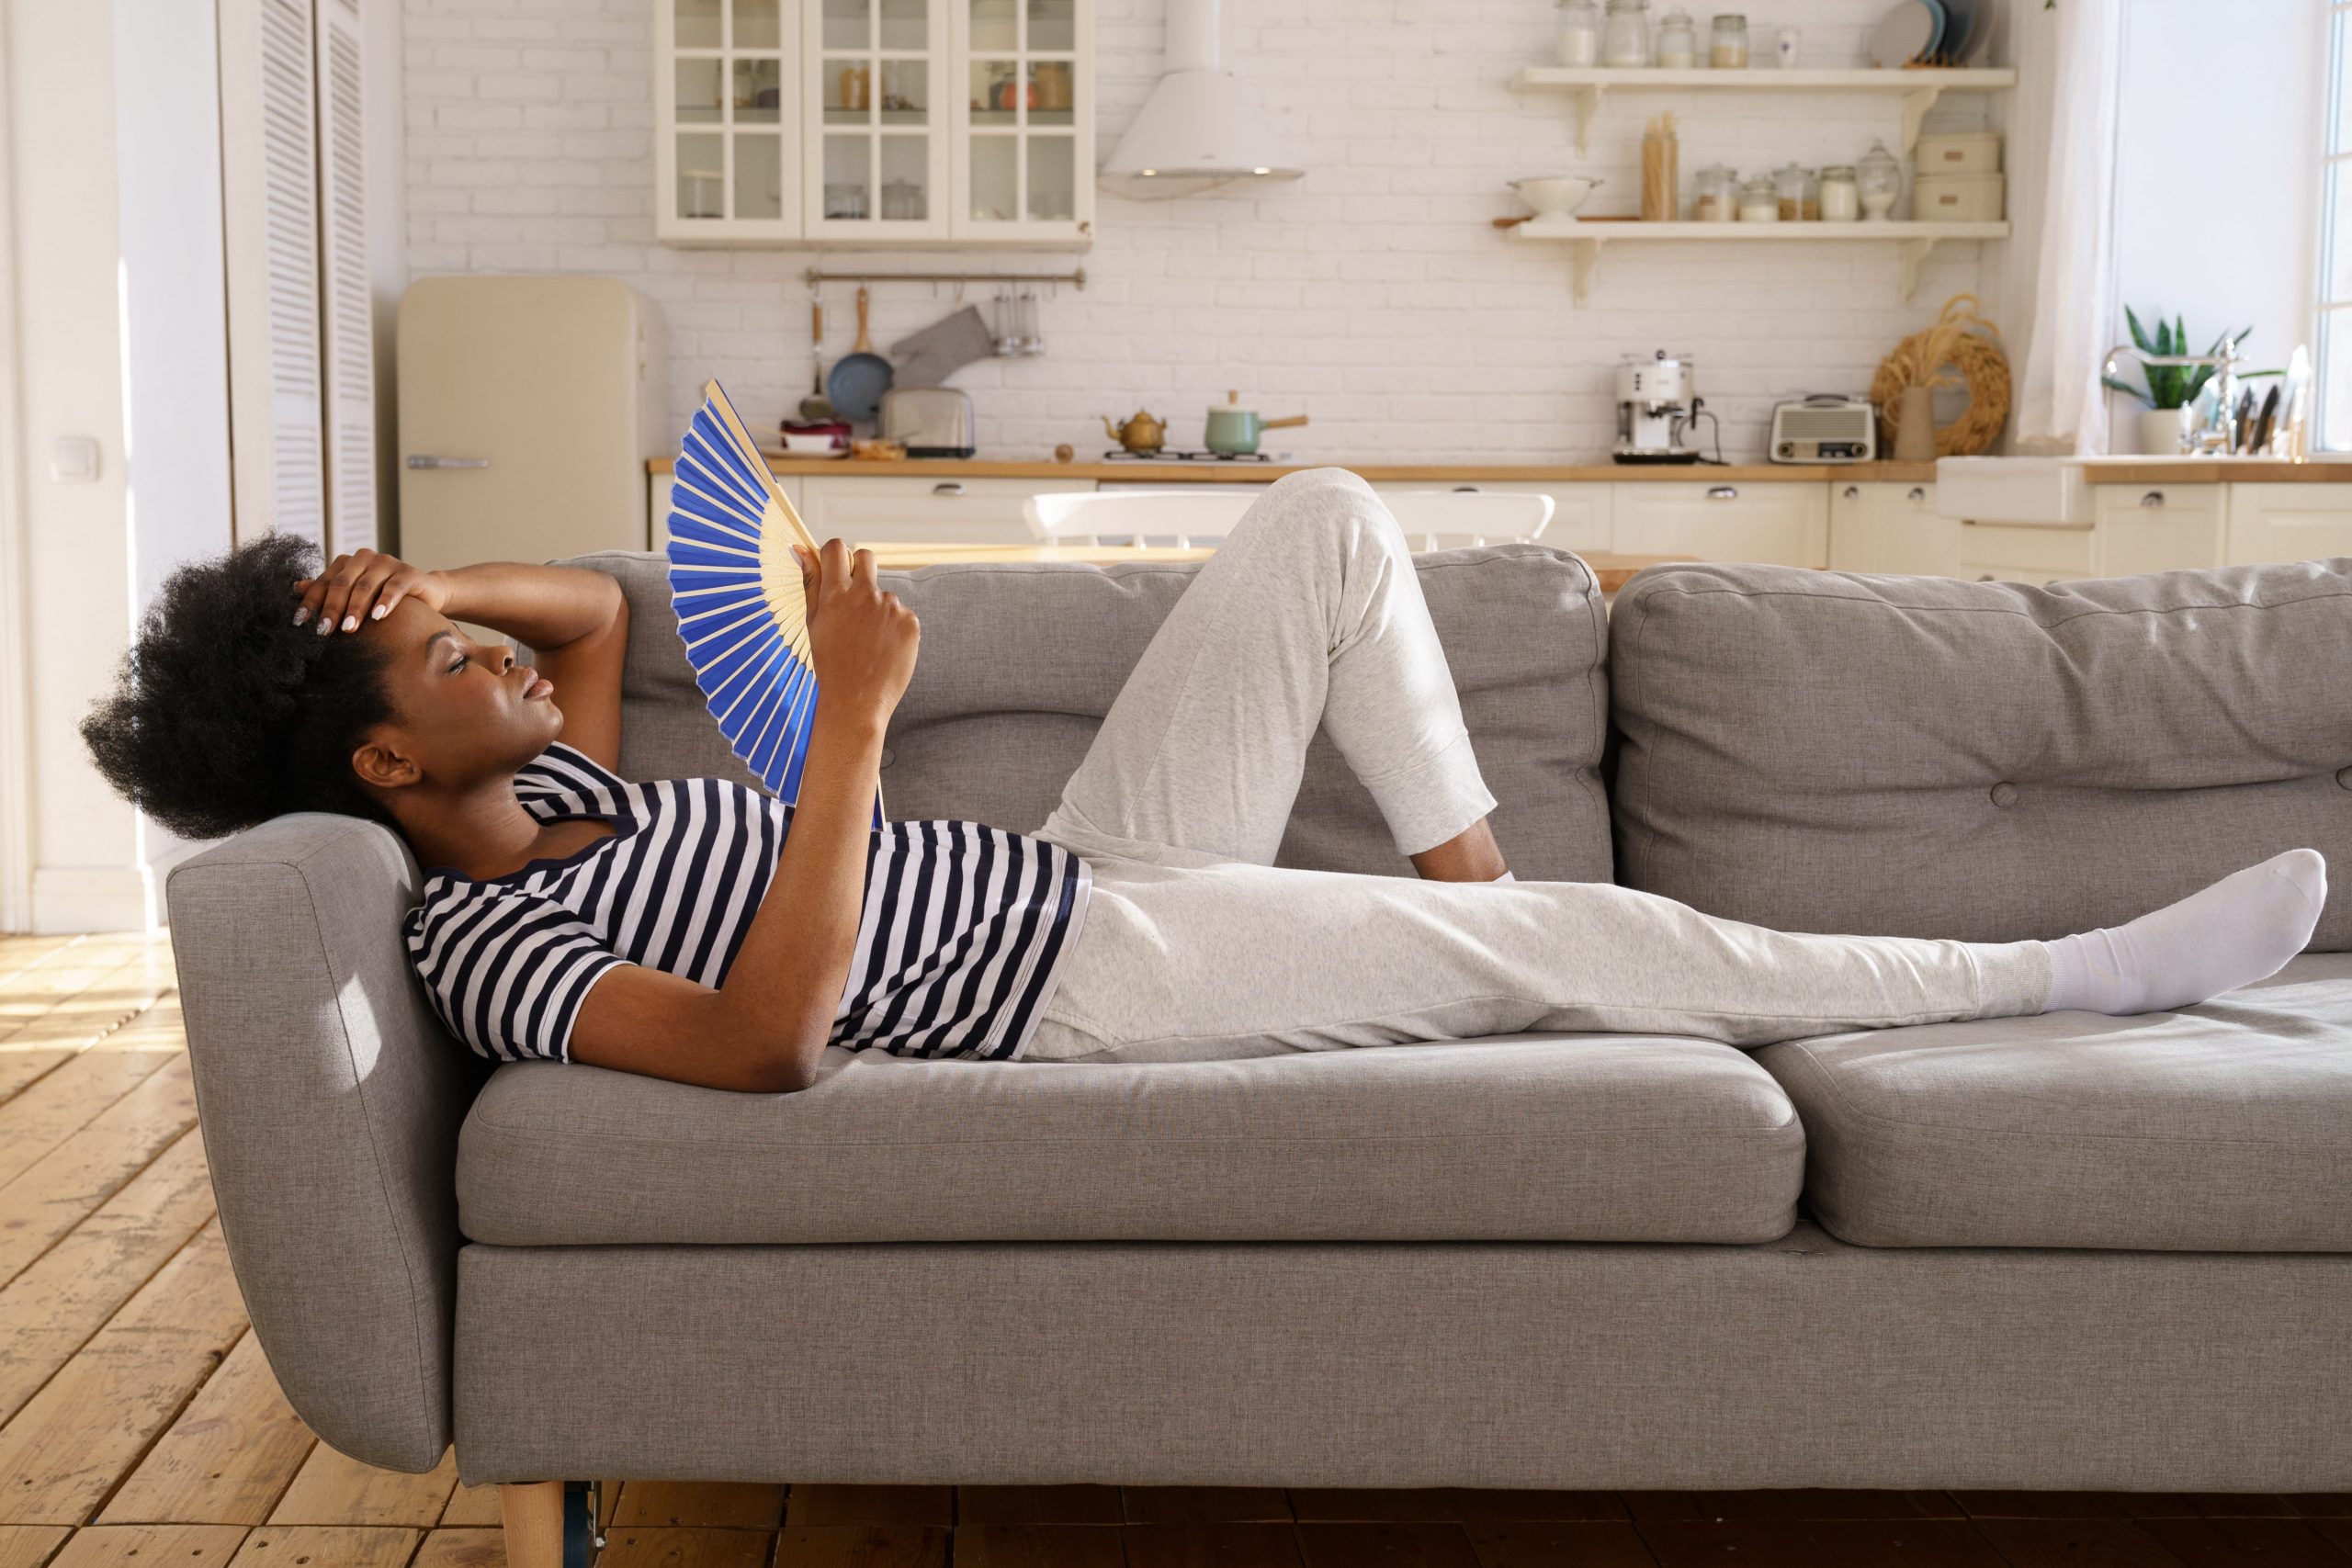 young woman on couch in apartment trying to cool off with fan